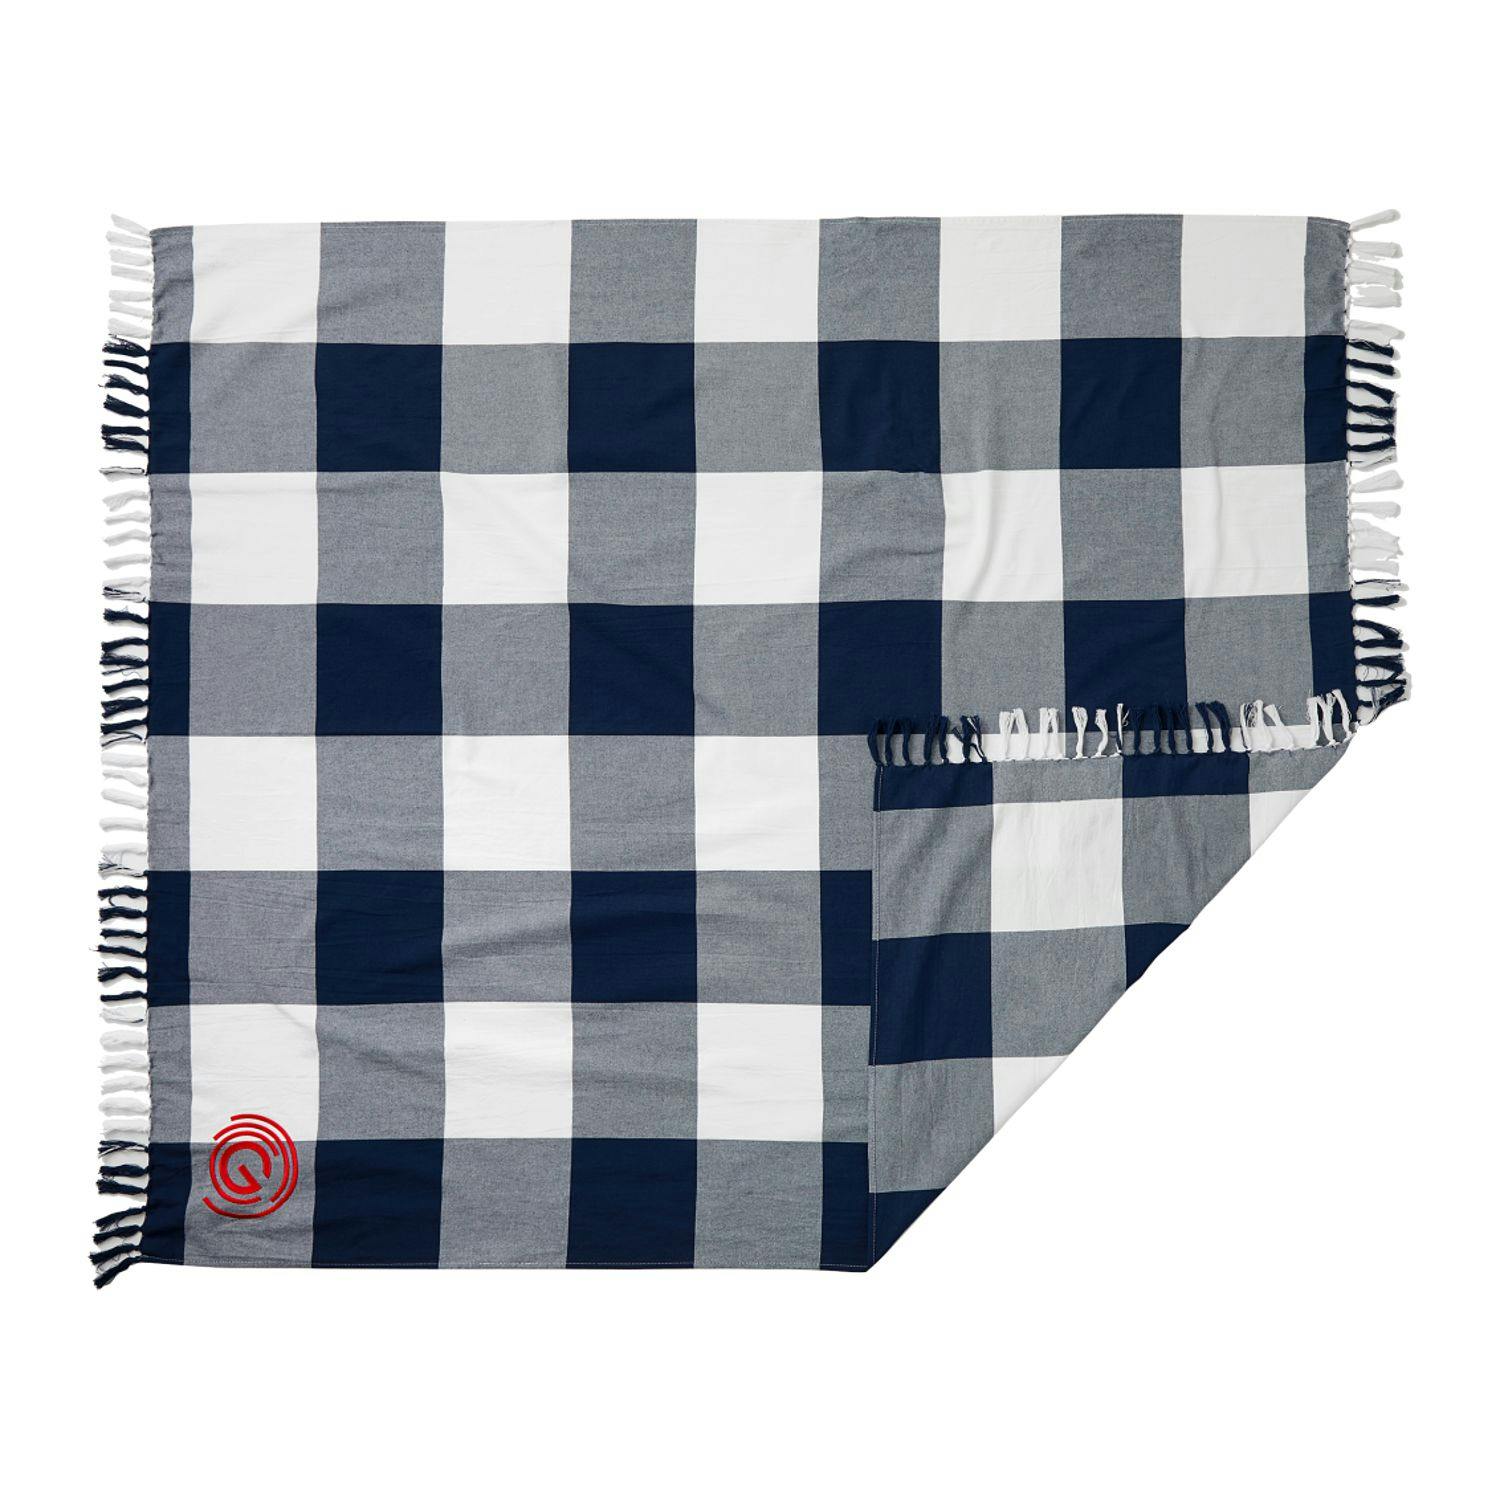 Field & Co. 100% Organic Cotton Check Throw Blanke - additional Image 2